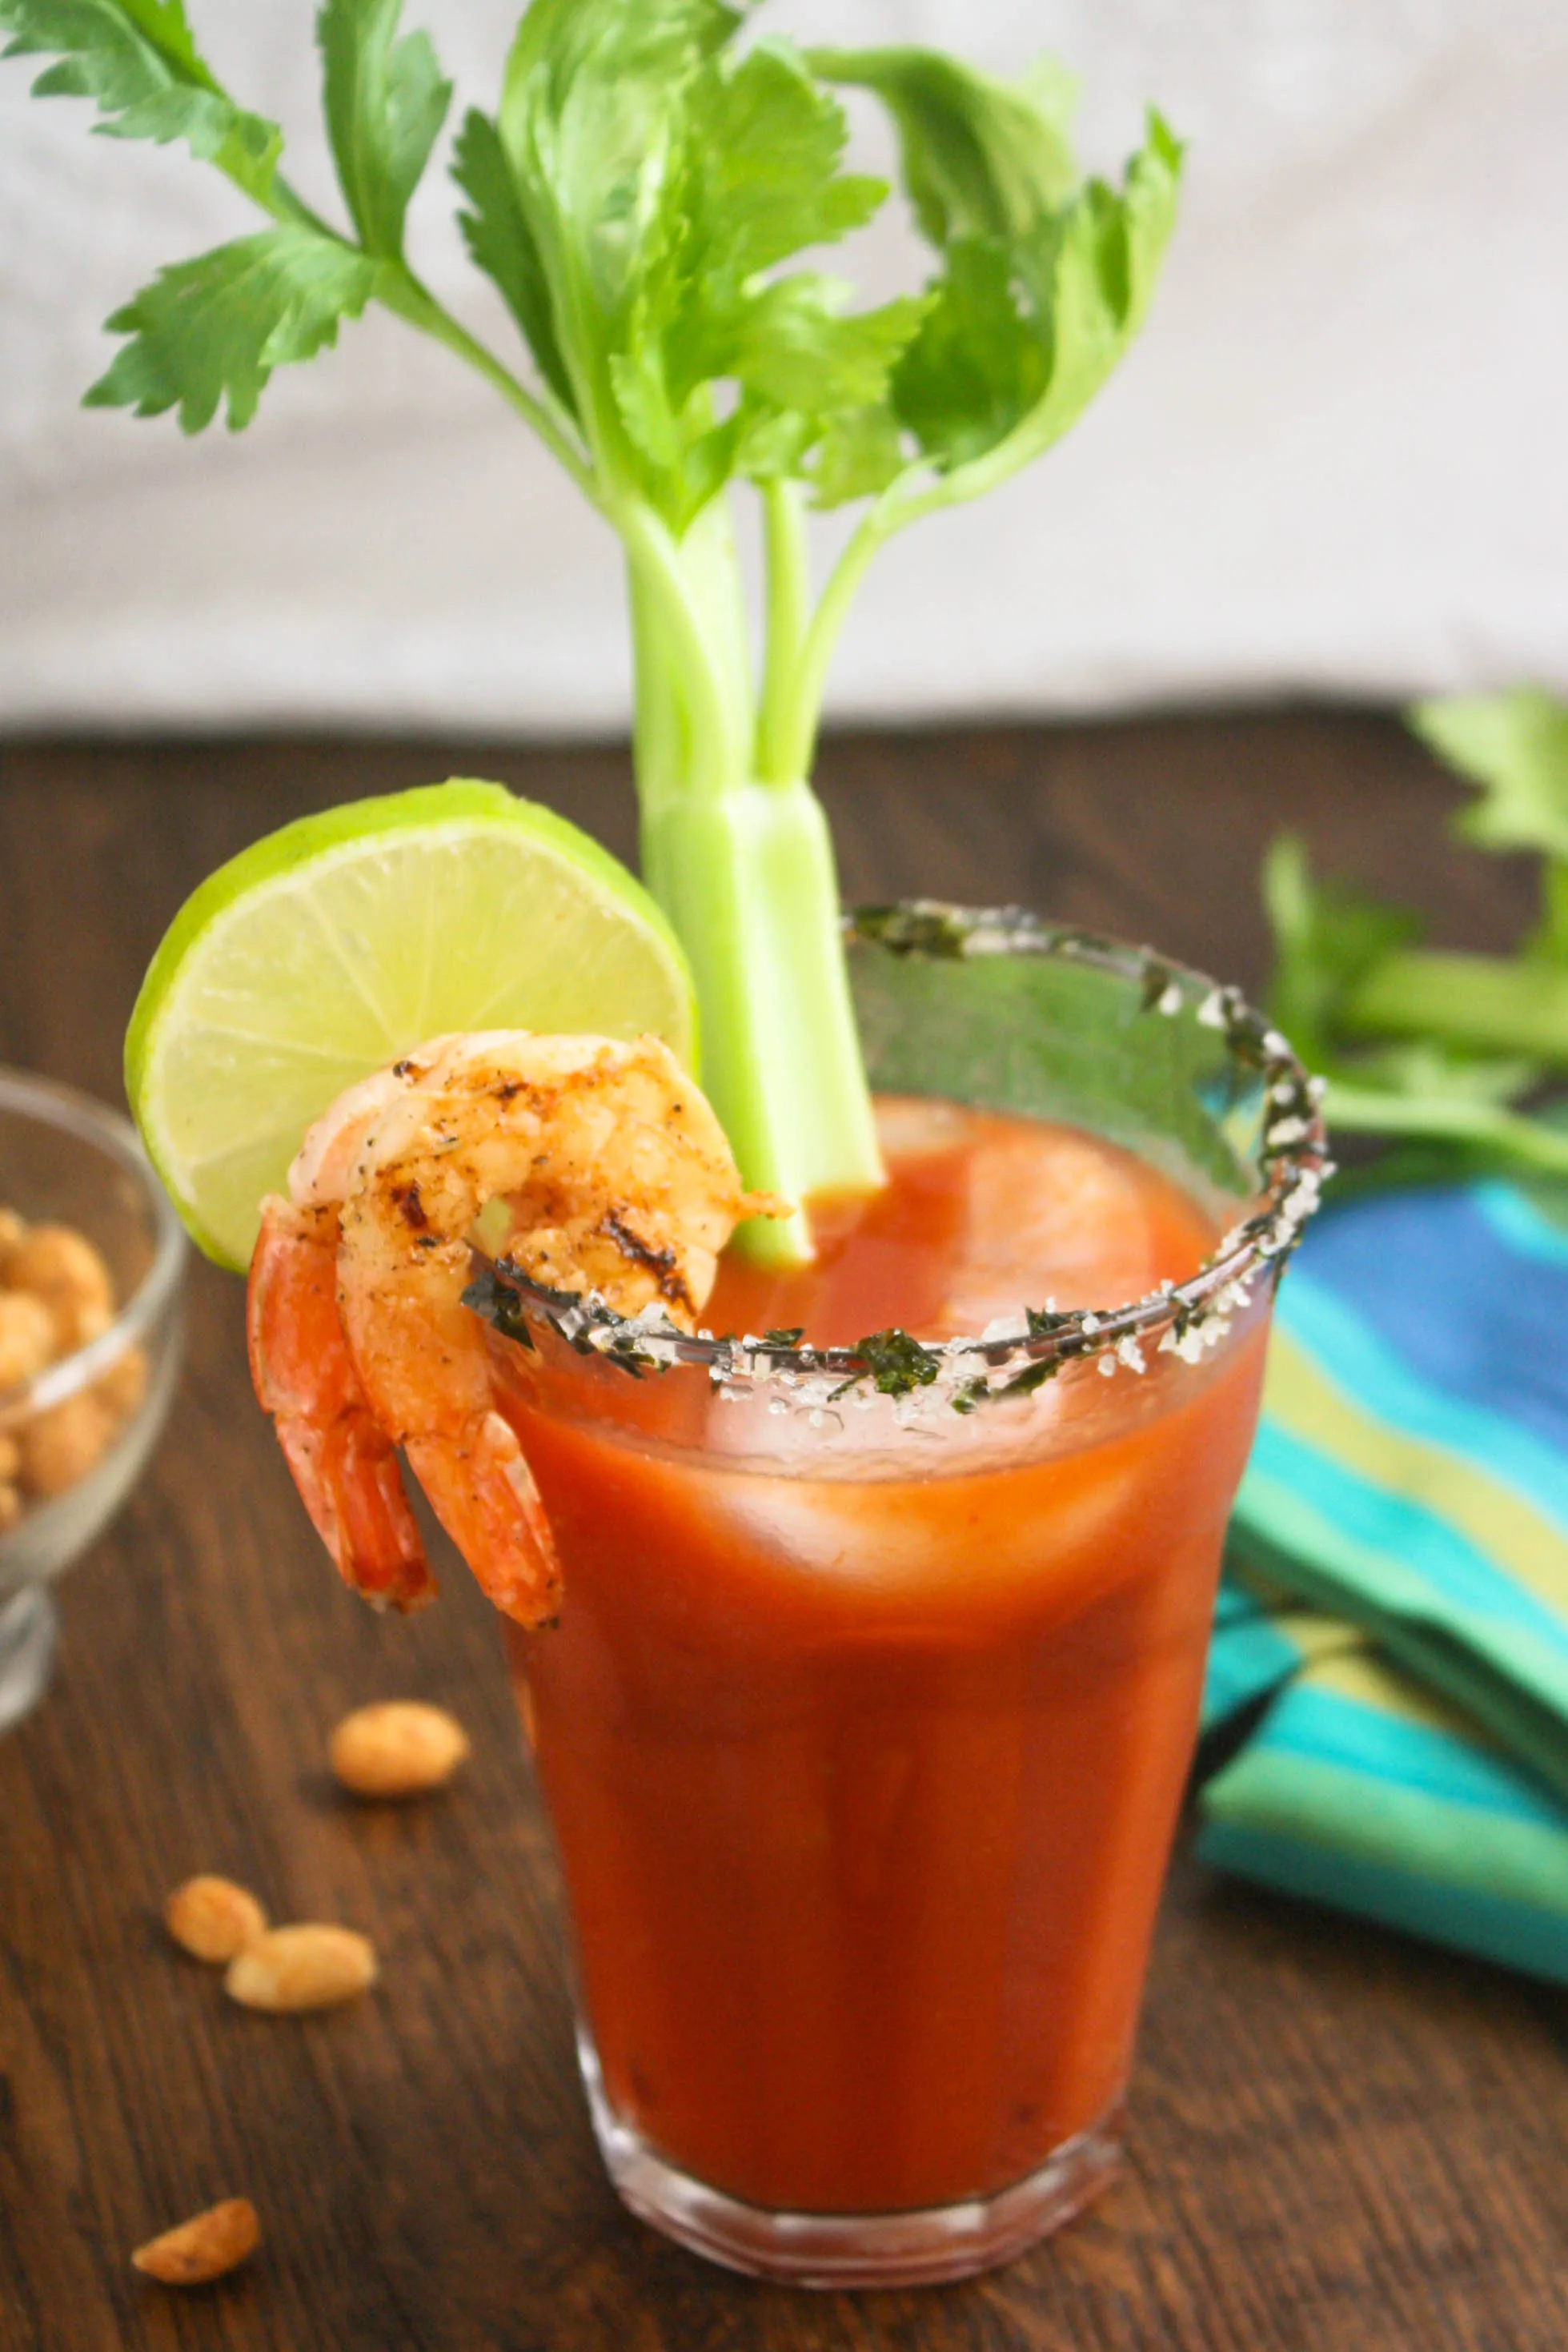 Asian Bloody Mary Cocktails are filled with great flavor. They include a fun garnish, too, and are perfect to serve for your next brunch!